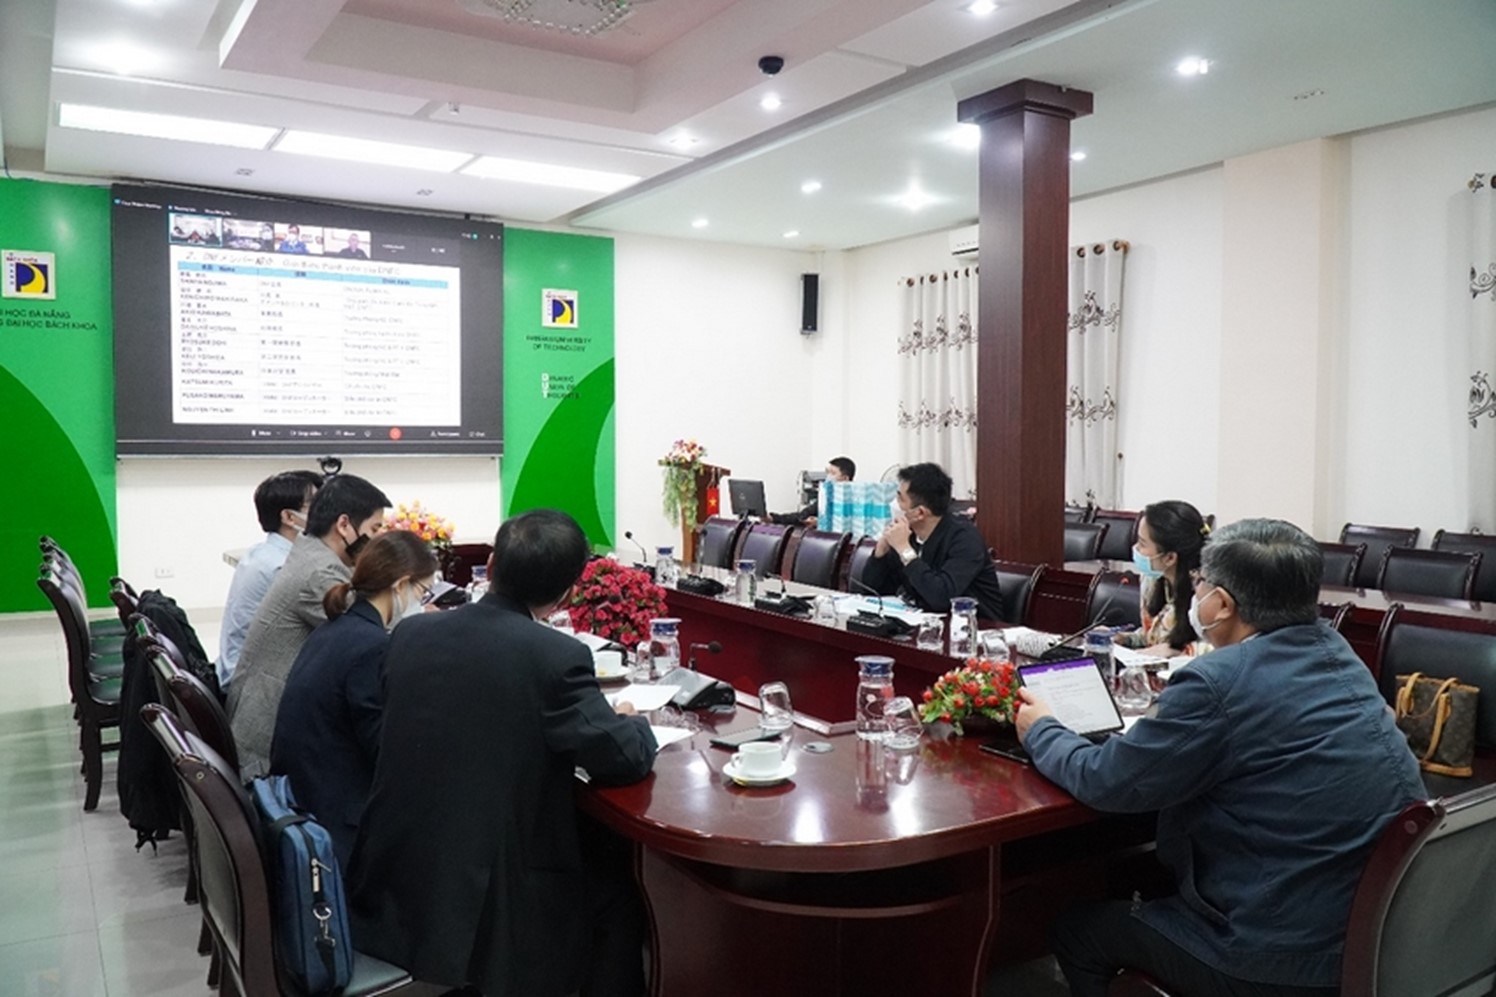 University of Science and Technology, University of Danang cooperated with Fujikin Group and the Management Board of Da Nang Hi-Tech Zone and Technology Zones